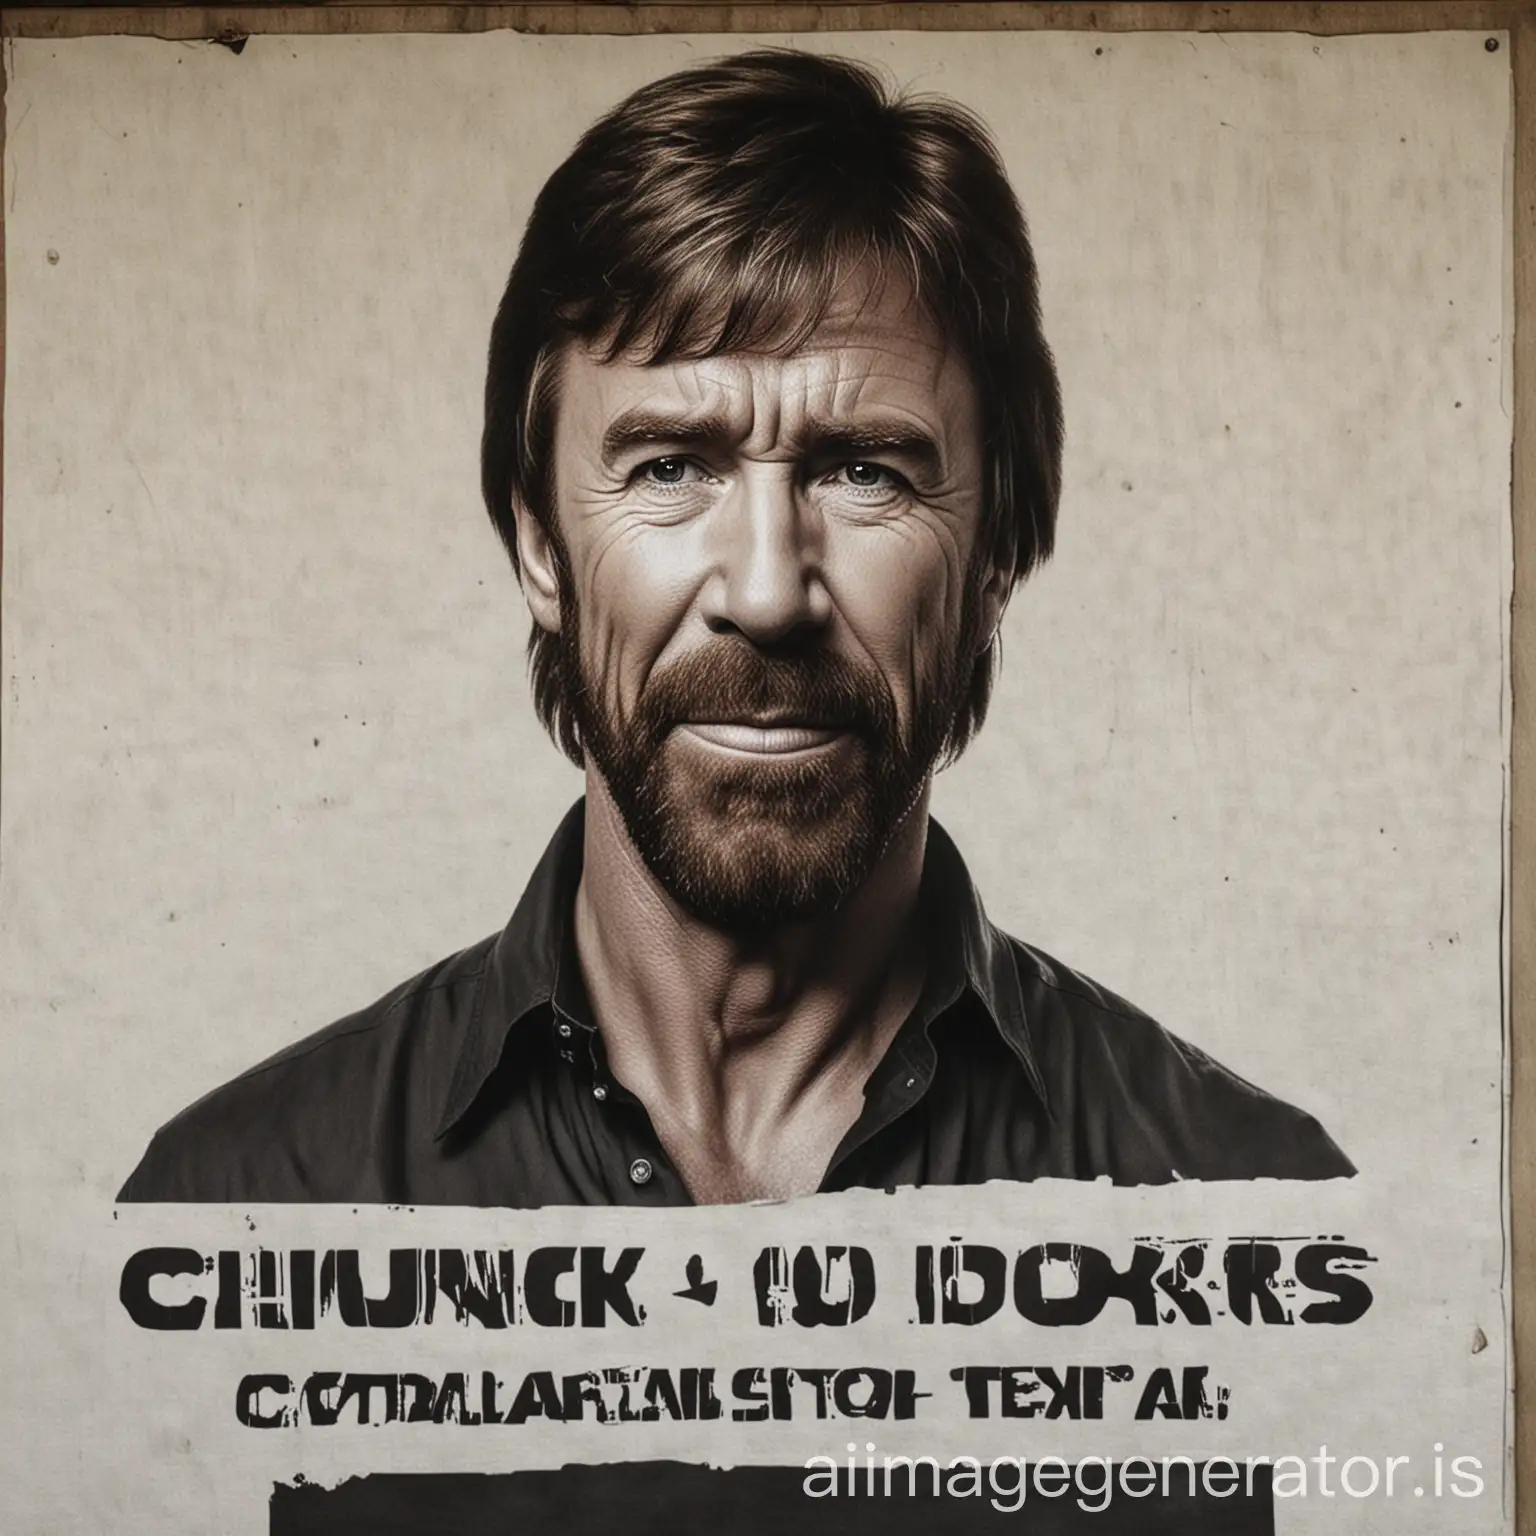 Chuck Norris, with the words "CHUCK Presale Coming Soon" on a sign